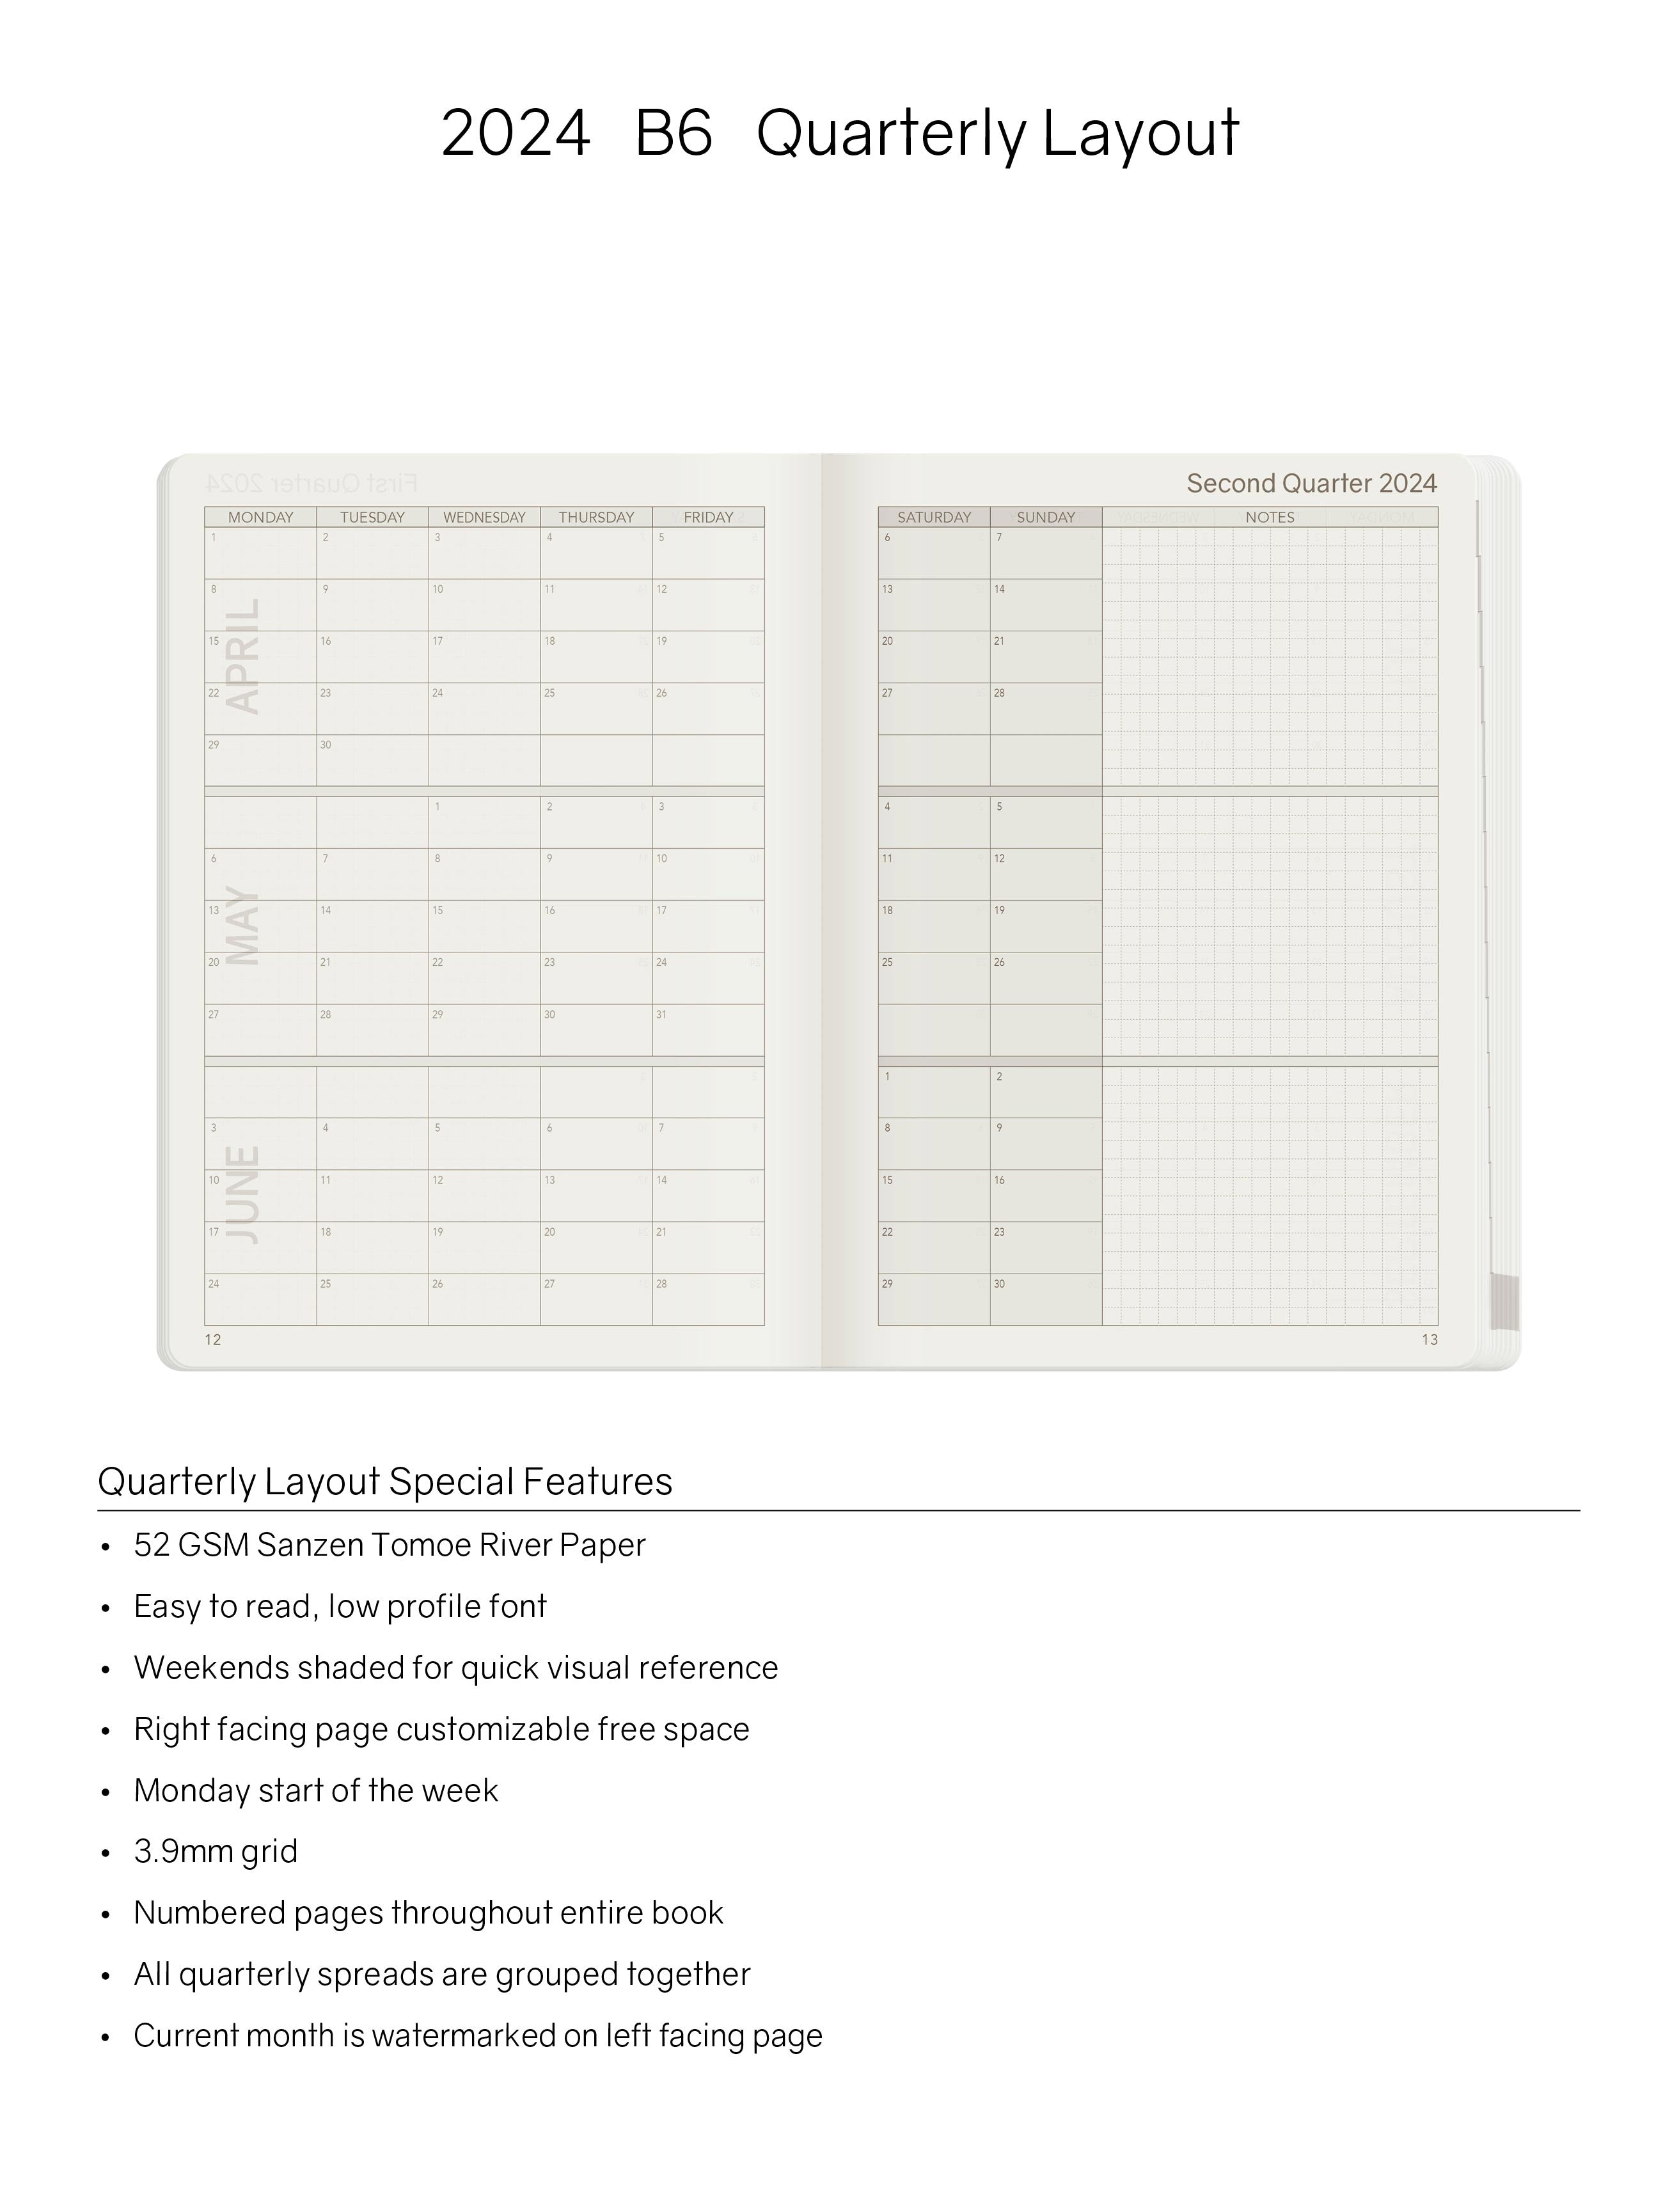 2024 B6 Weekly Planner -Evergreen (Dark Green) - 52gsm Tomoe River Paper (All in One)